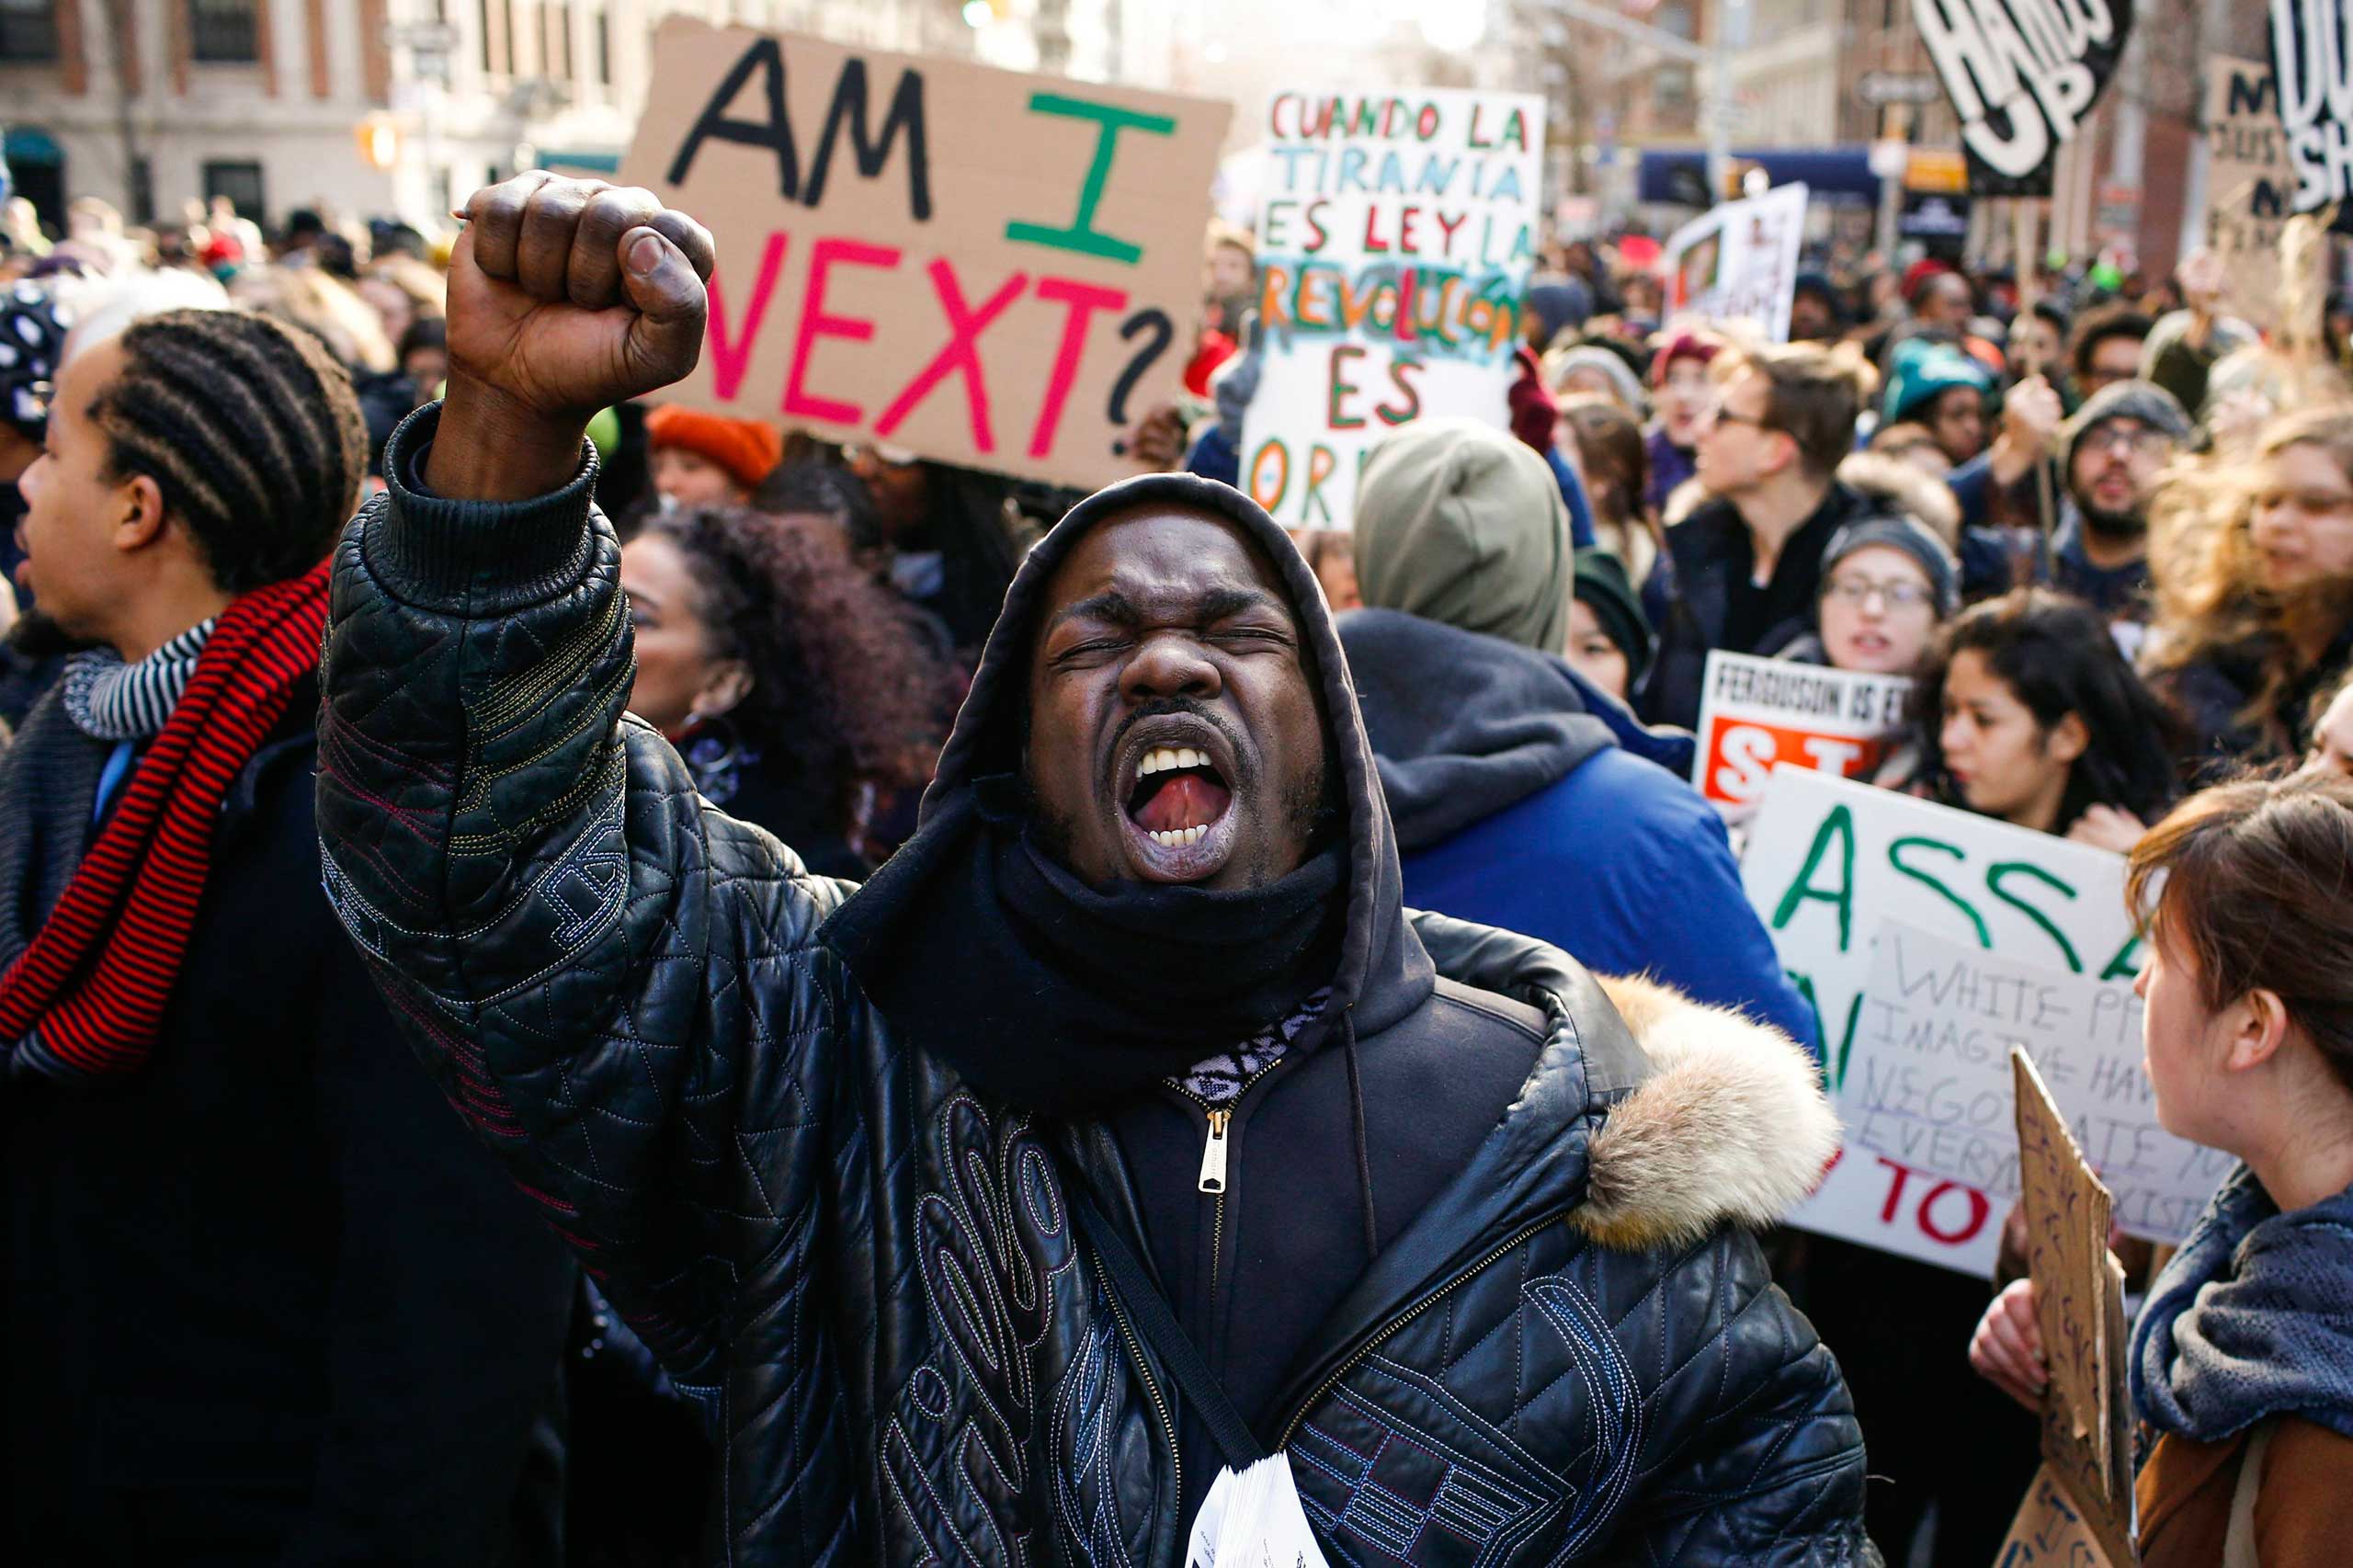 People shout slogans against police as they take part in a march against police violence in New York City on Dec. 13, 2014.